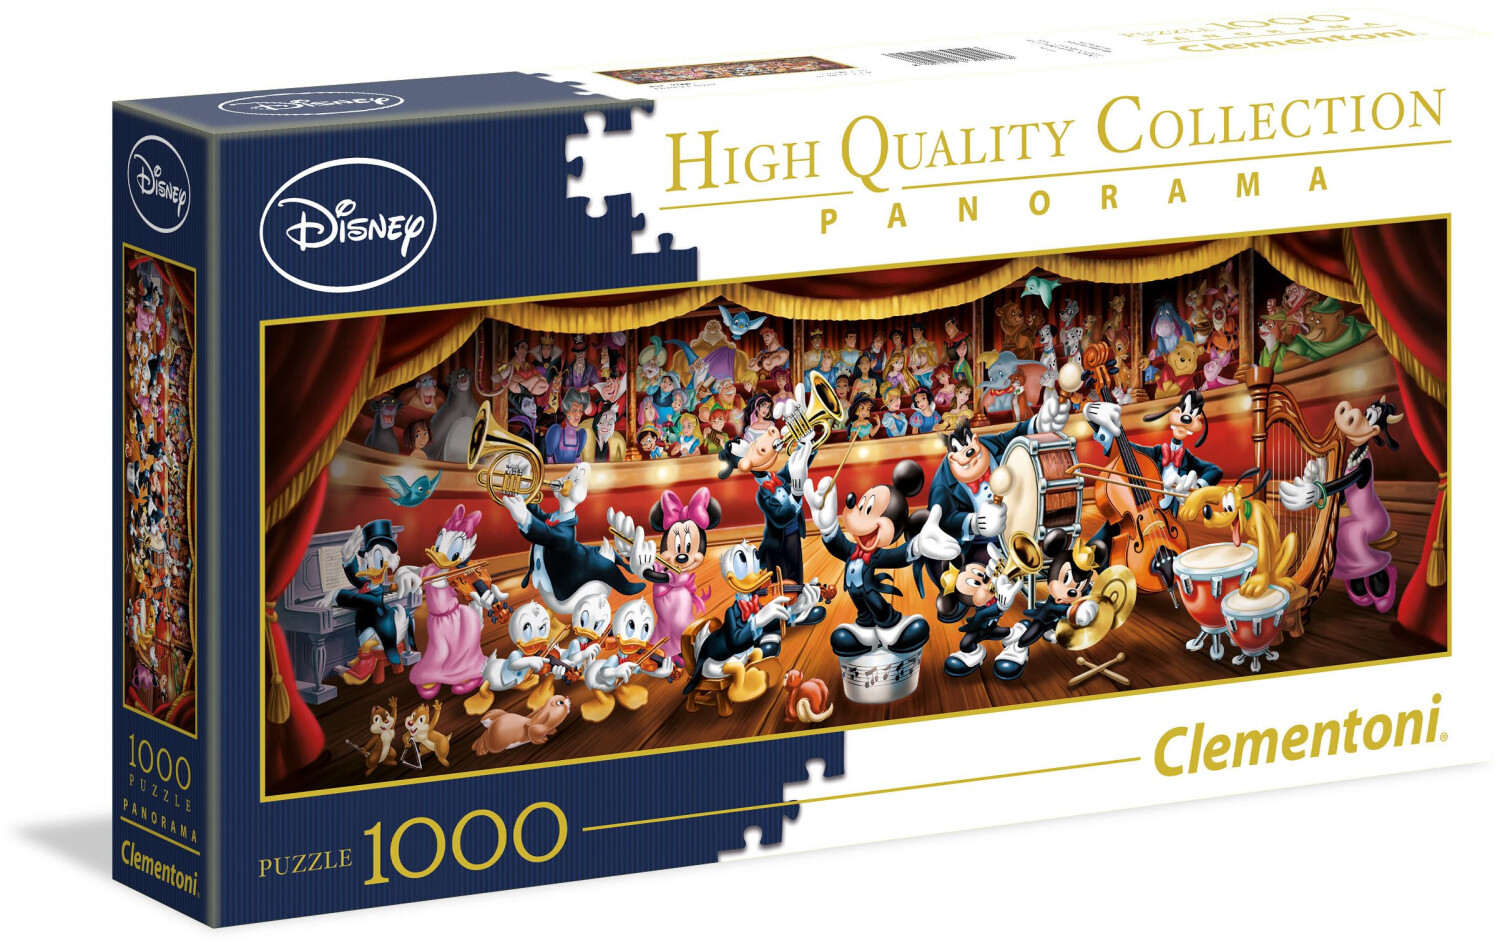 Clementoni High Quality Collection Disney Orchestra Panorama (1000 pcs.) a  € 6,00 (oggi)